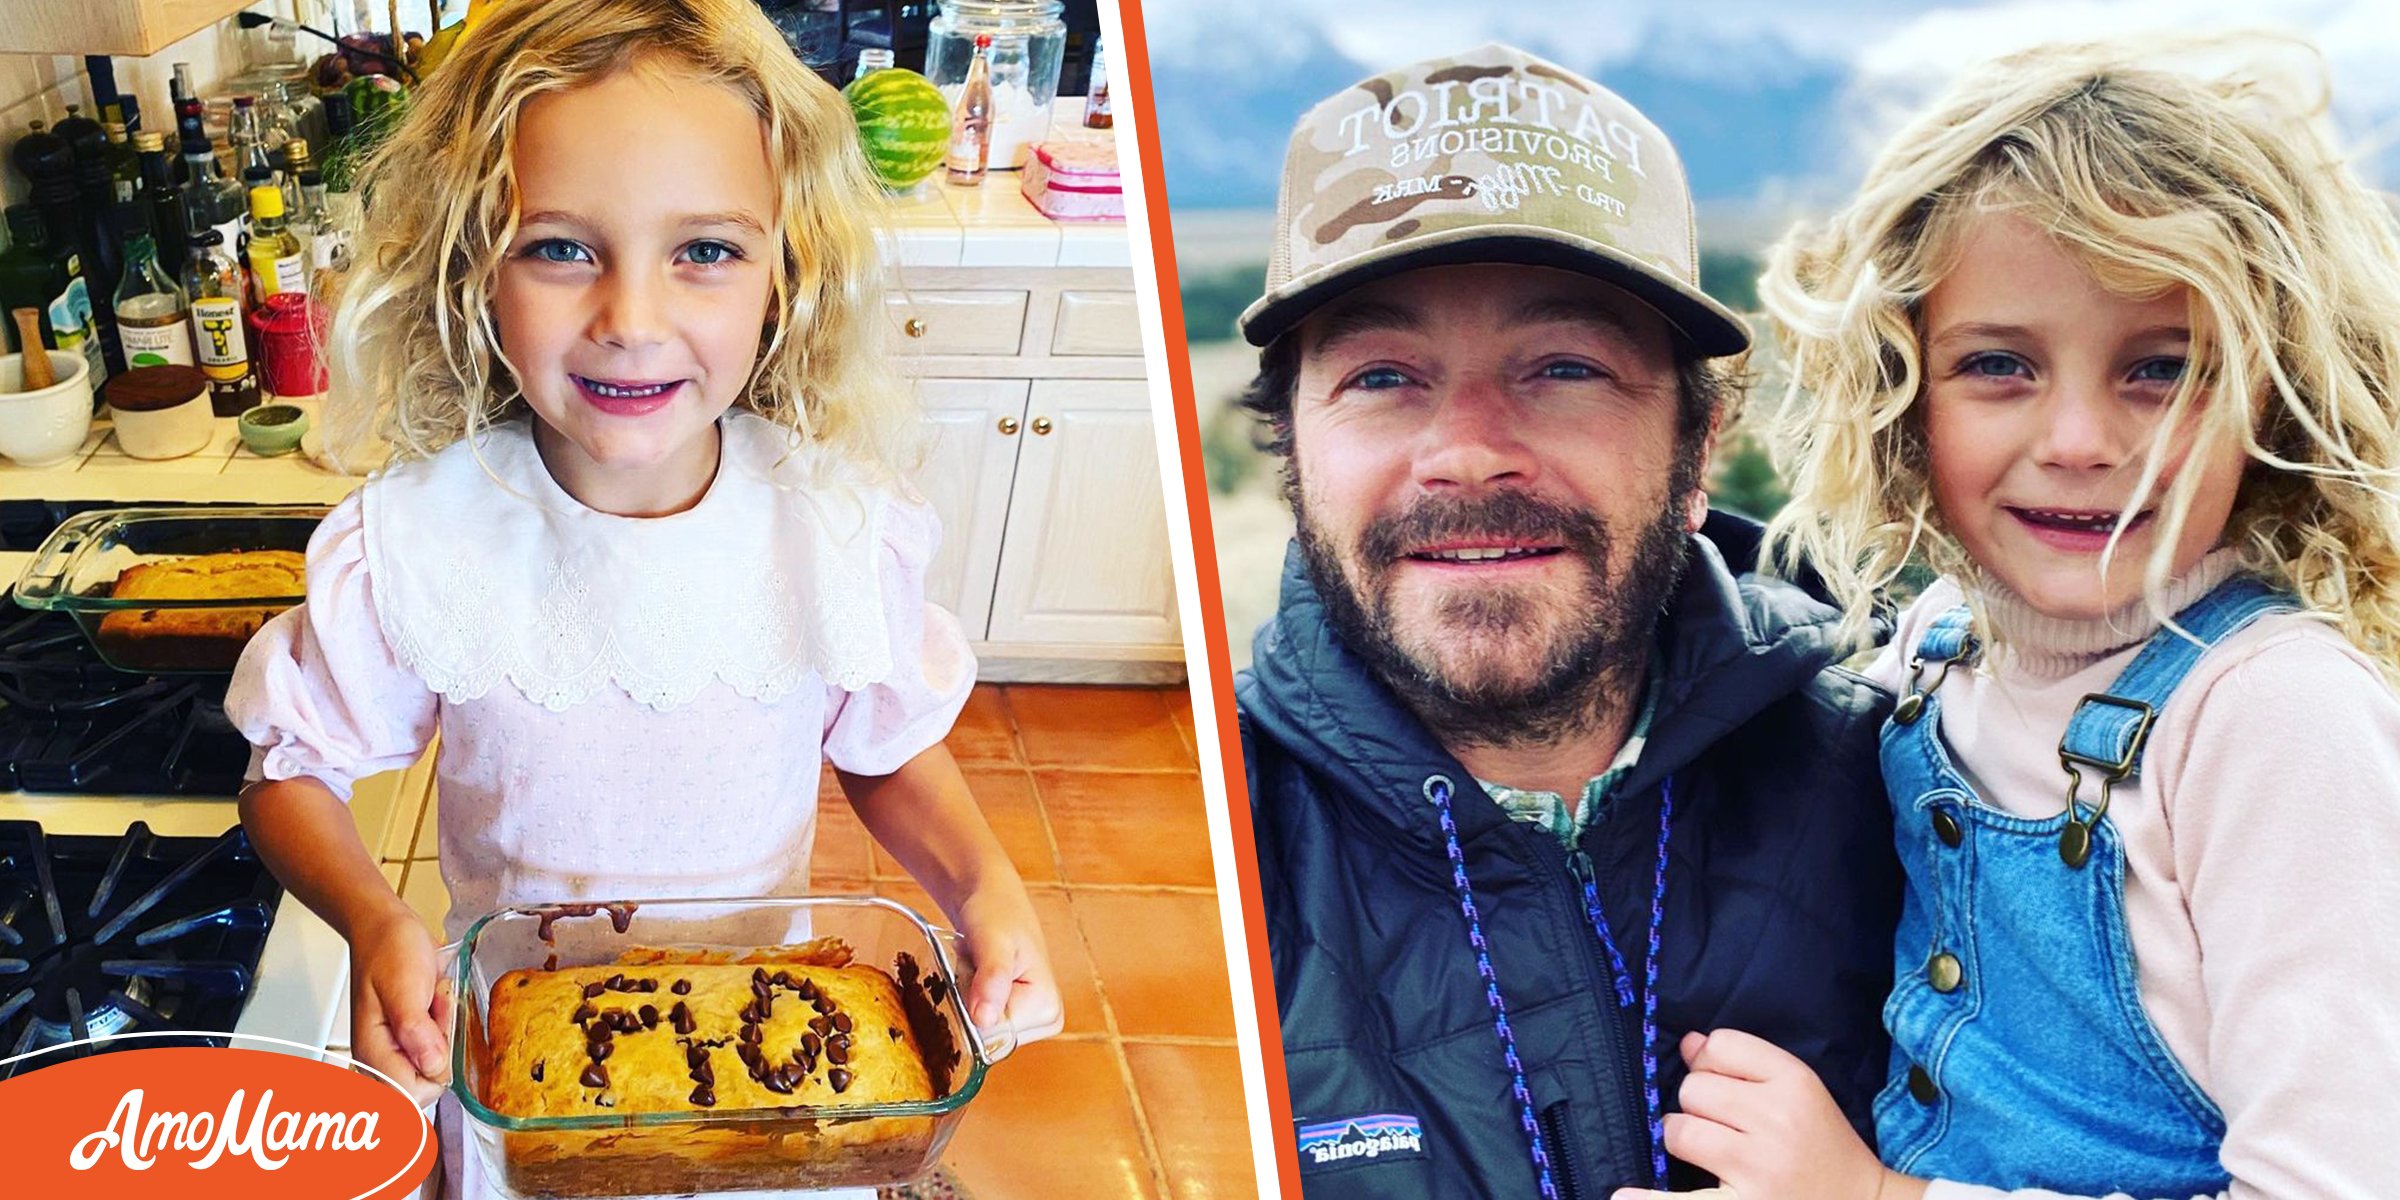 Fianna Francis Masterson Is Danny Masterson’s Only Kid & Loves to Cook